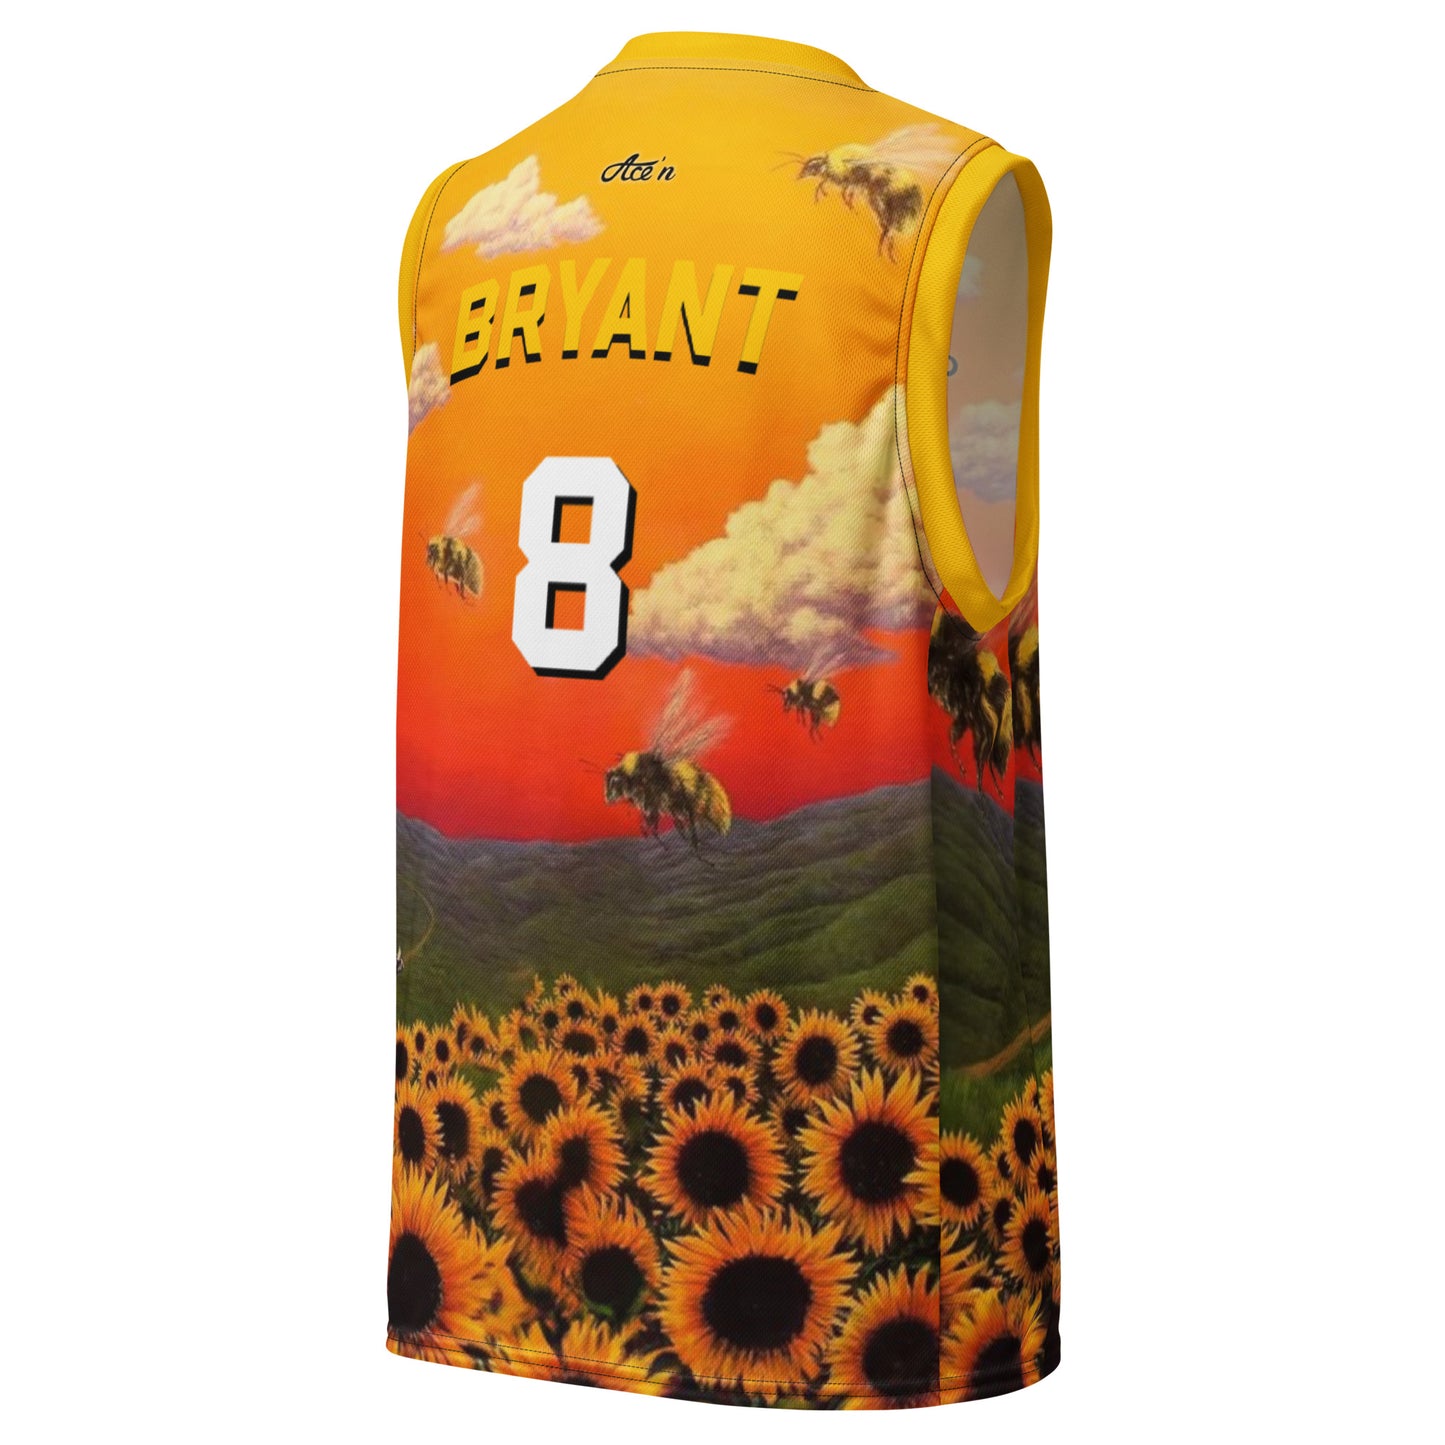 Ace'n "Los Angeles" Jersey | Bryant/#8